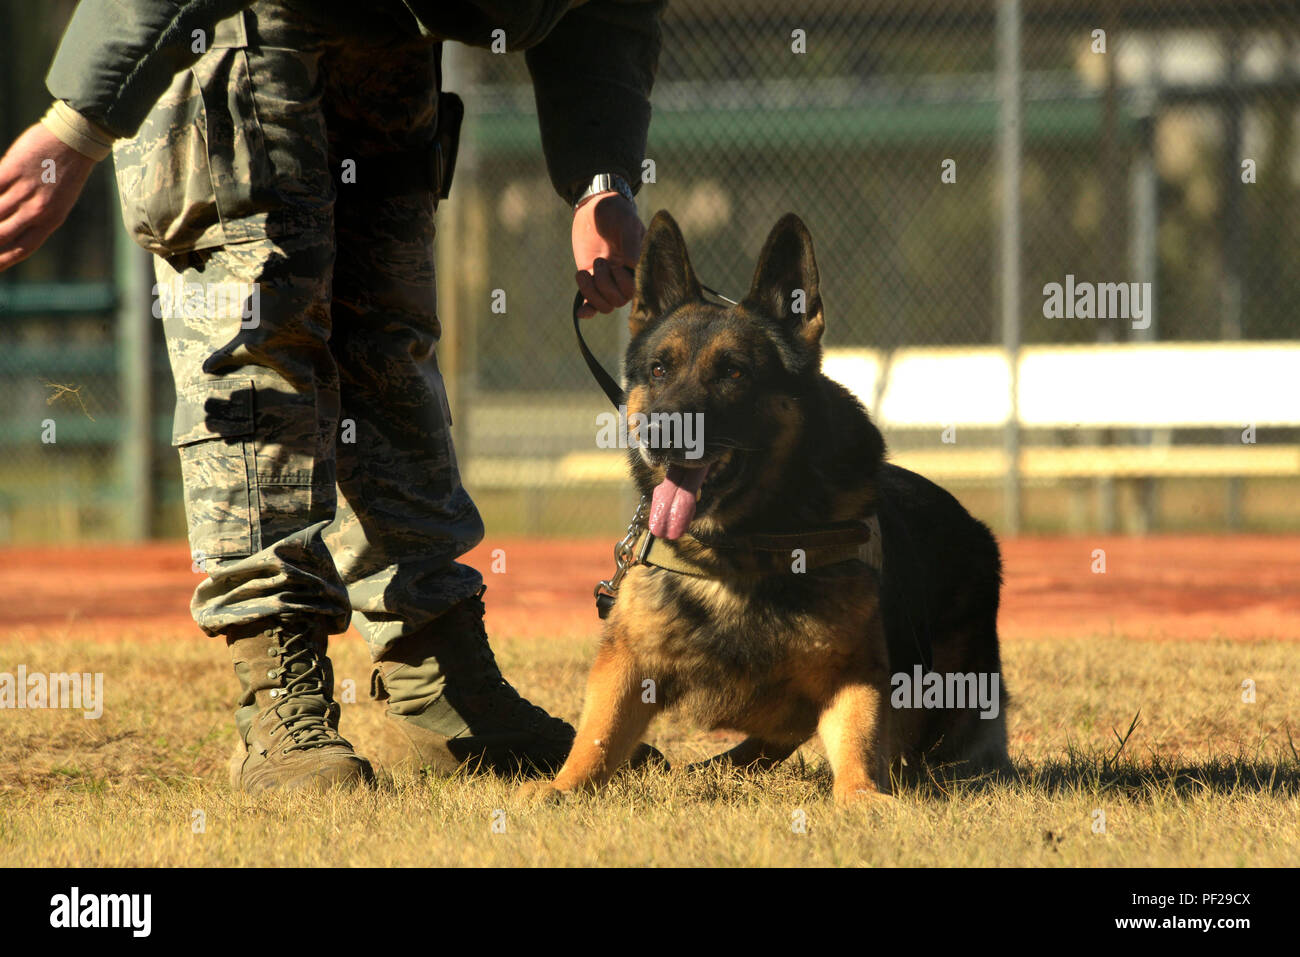 what are the german commands for police dogs